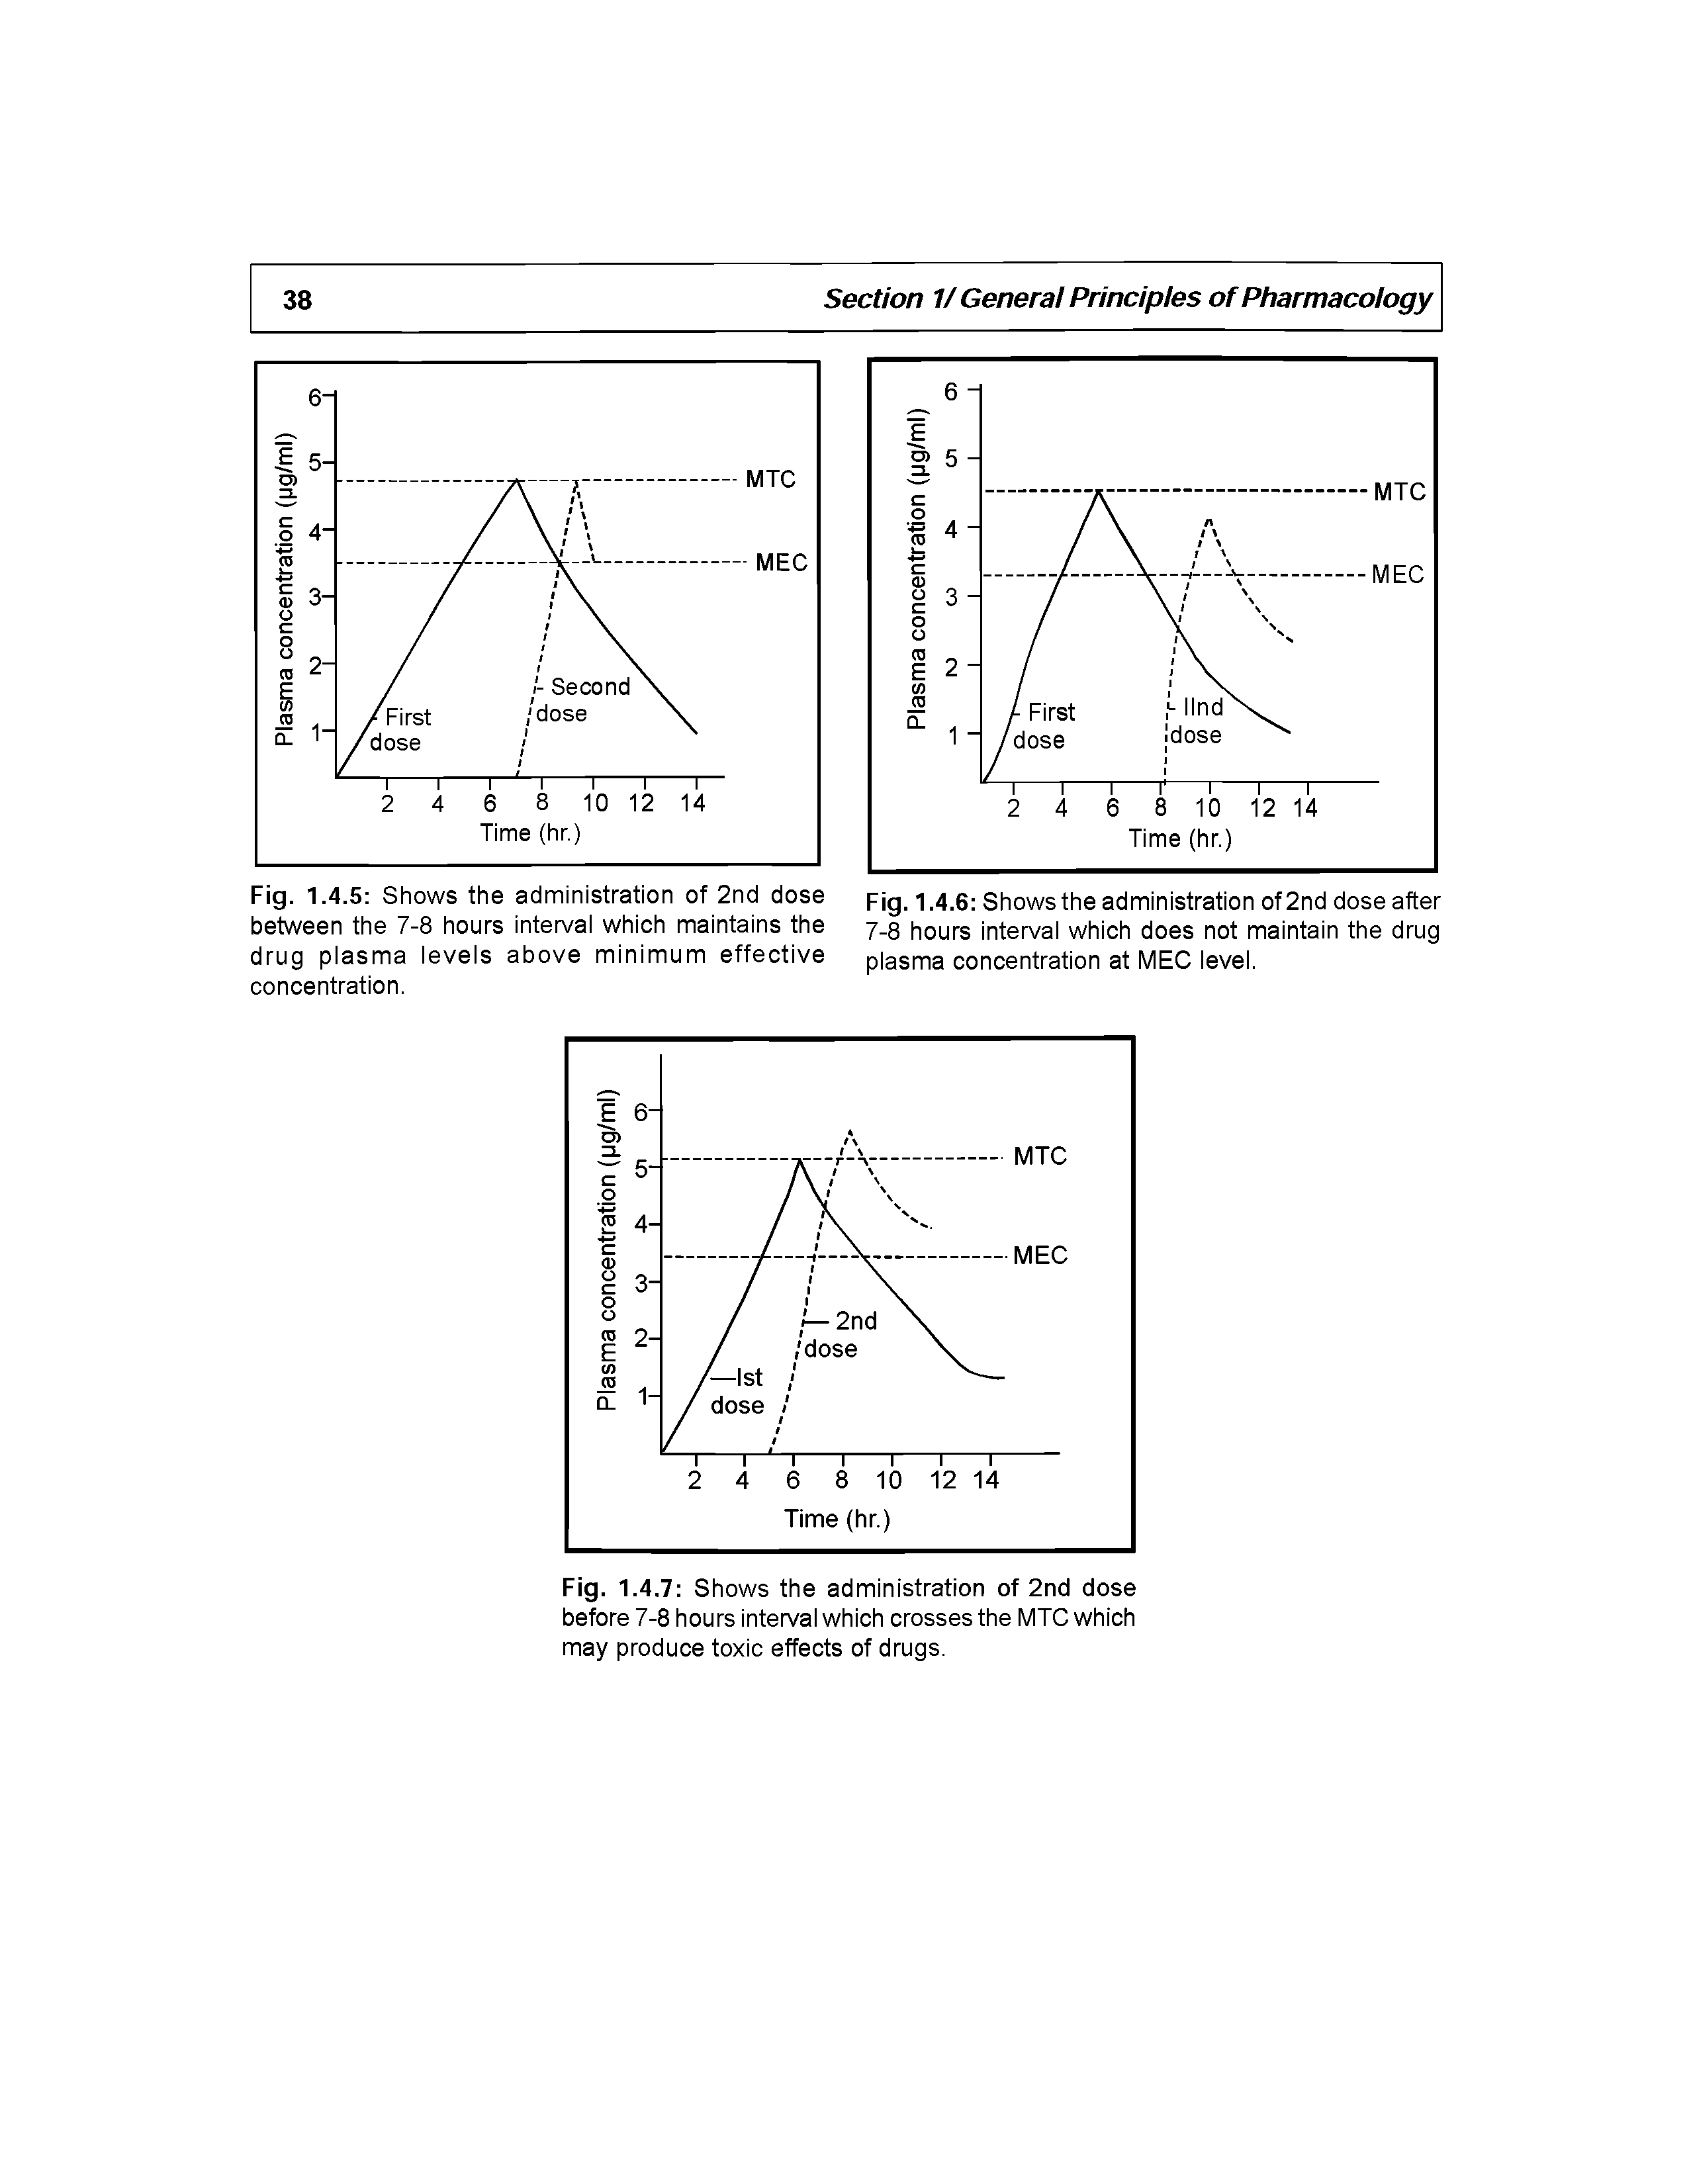 Fig. 1.4. 5 Shows the administration of 2nd dose between the 7-8 hours interval which maintains the drug plasma levels above minimum effective concentration.